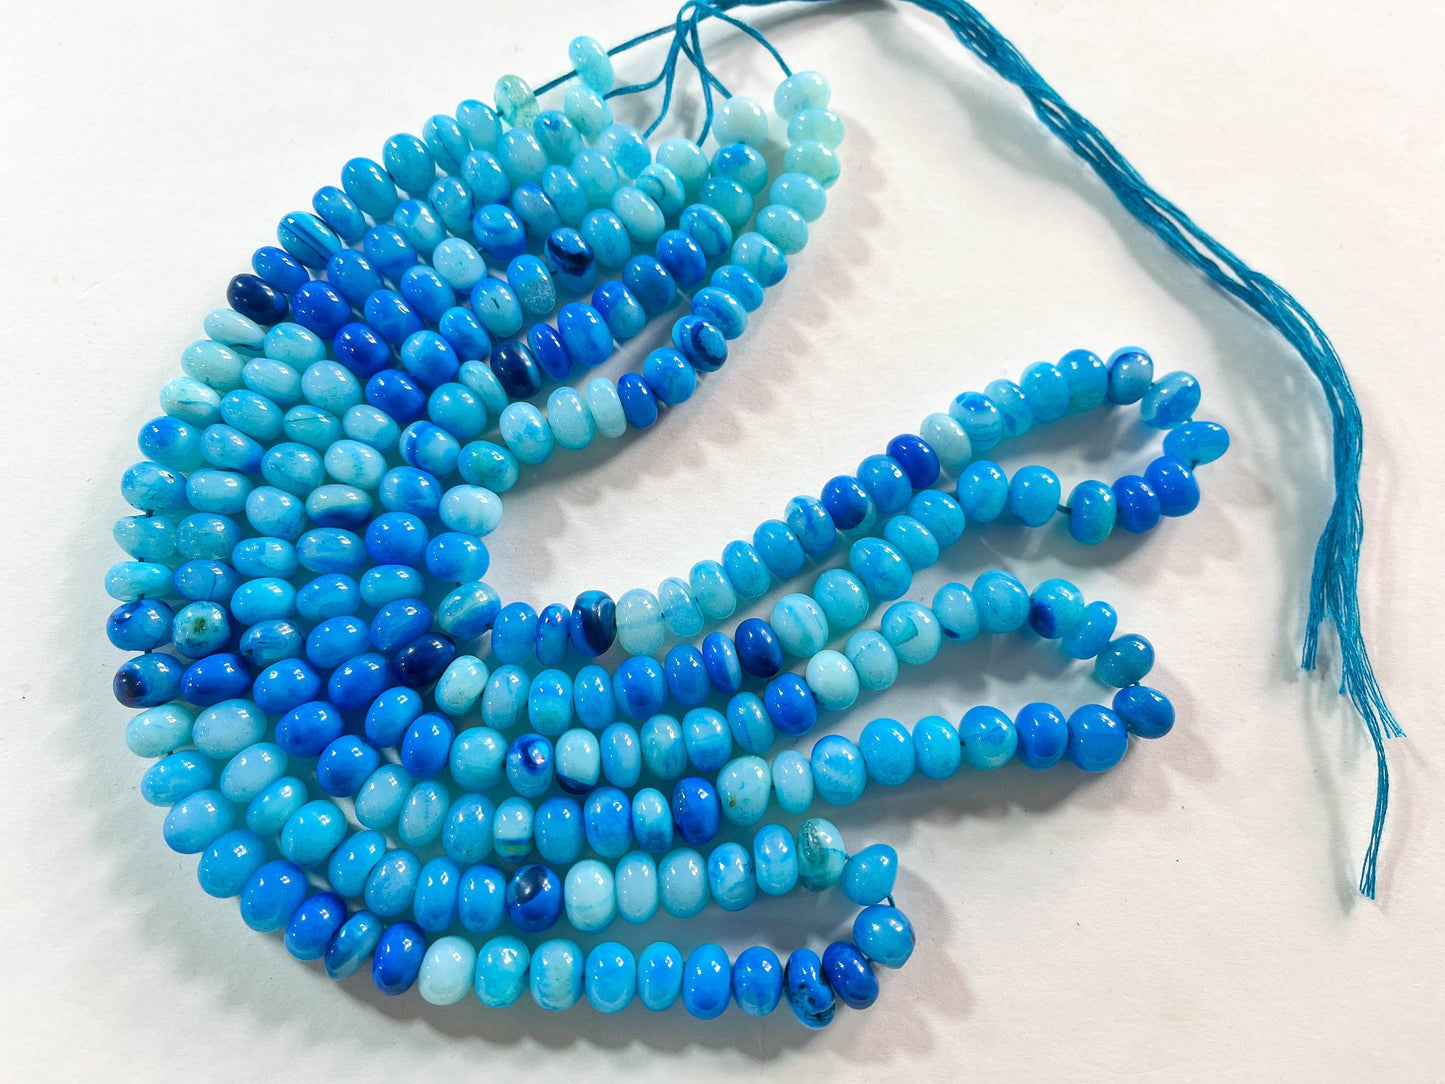 Beautiful Neon Blue Opal Smooth Rondelle Shape Beads Beadsforyourjewelry